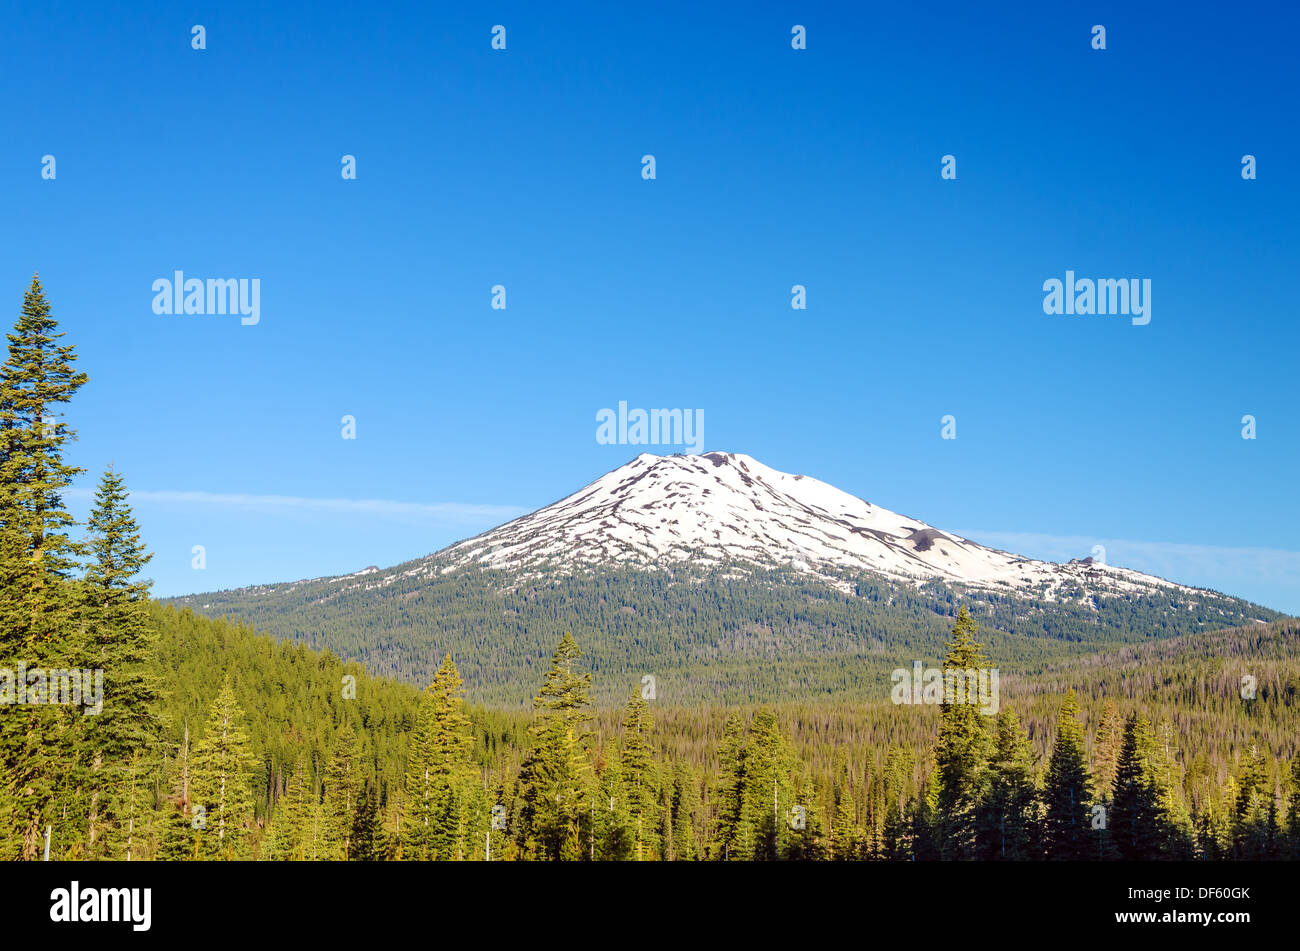 Early summer view of Mt. Bachelor with a beautiful green forest below it. Stock Photo